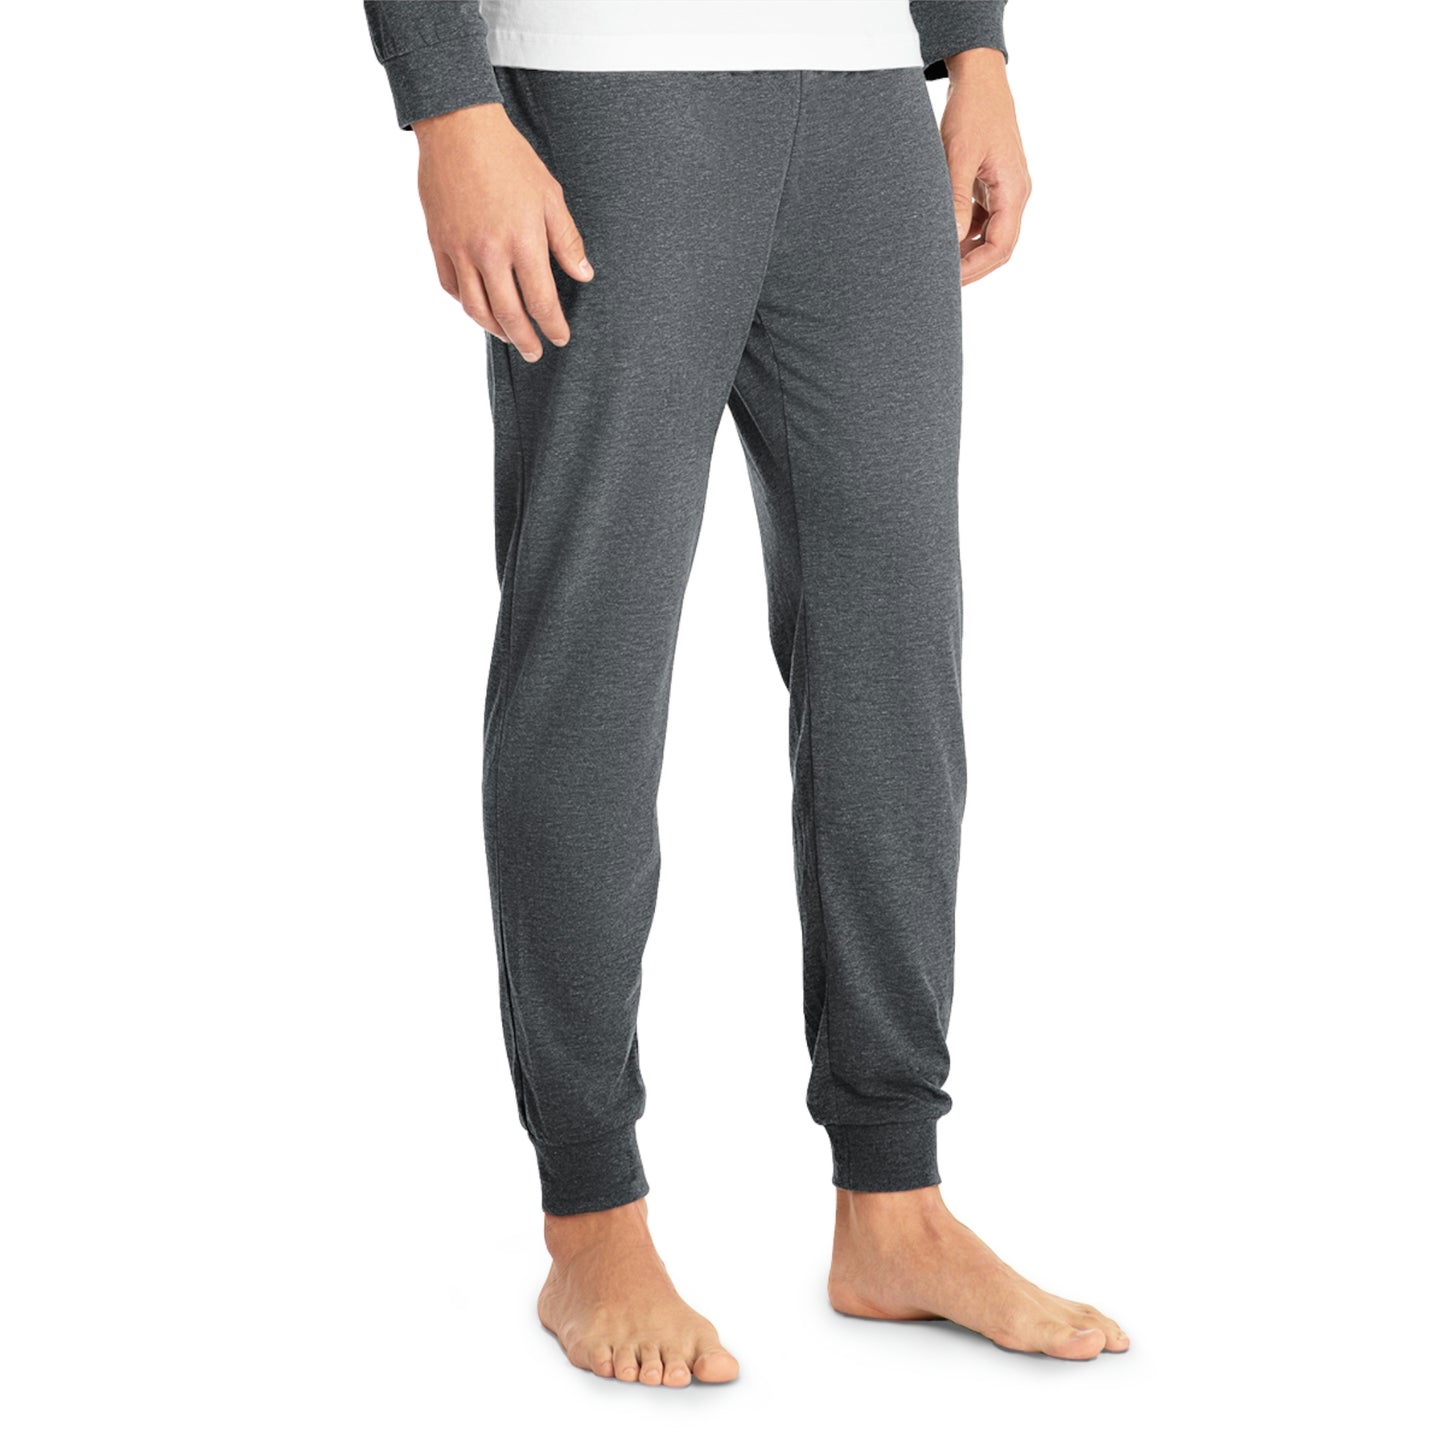 Bed Person Sport Mode Pajama Set